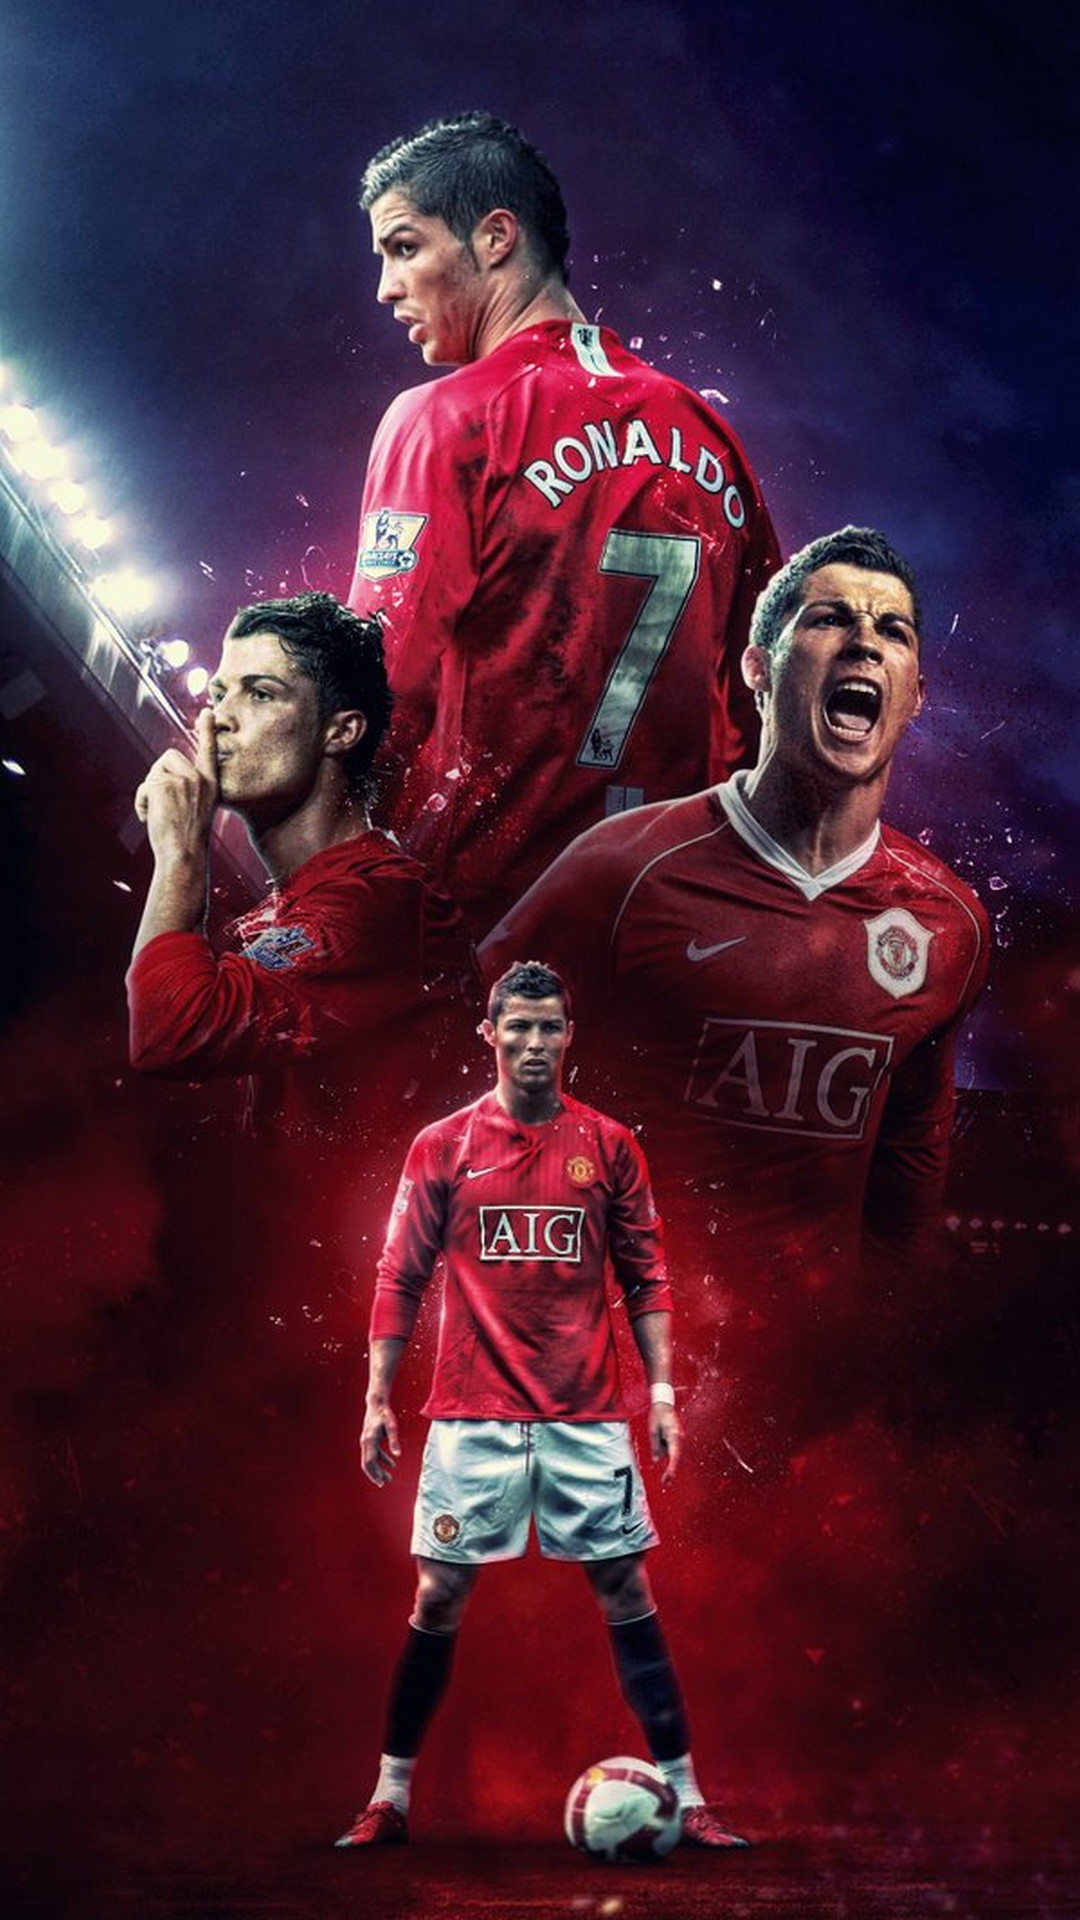 Cristiano Ronaldo Android Wallpaper With high-resolution 1080X1920 pixel. You can use this wallpaper for your Android backgrounds, Tablet, Samsung Screensavers, Mobile Phone Lock Screen and another Smartphones device